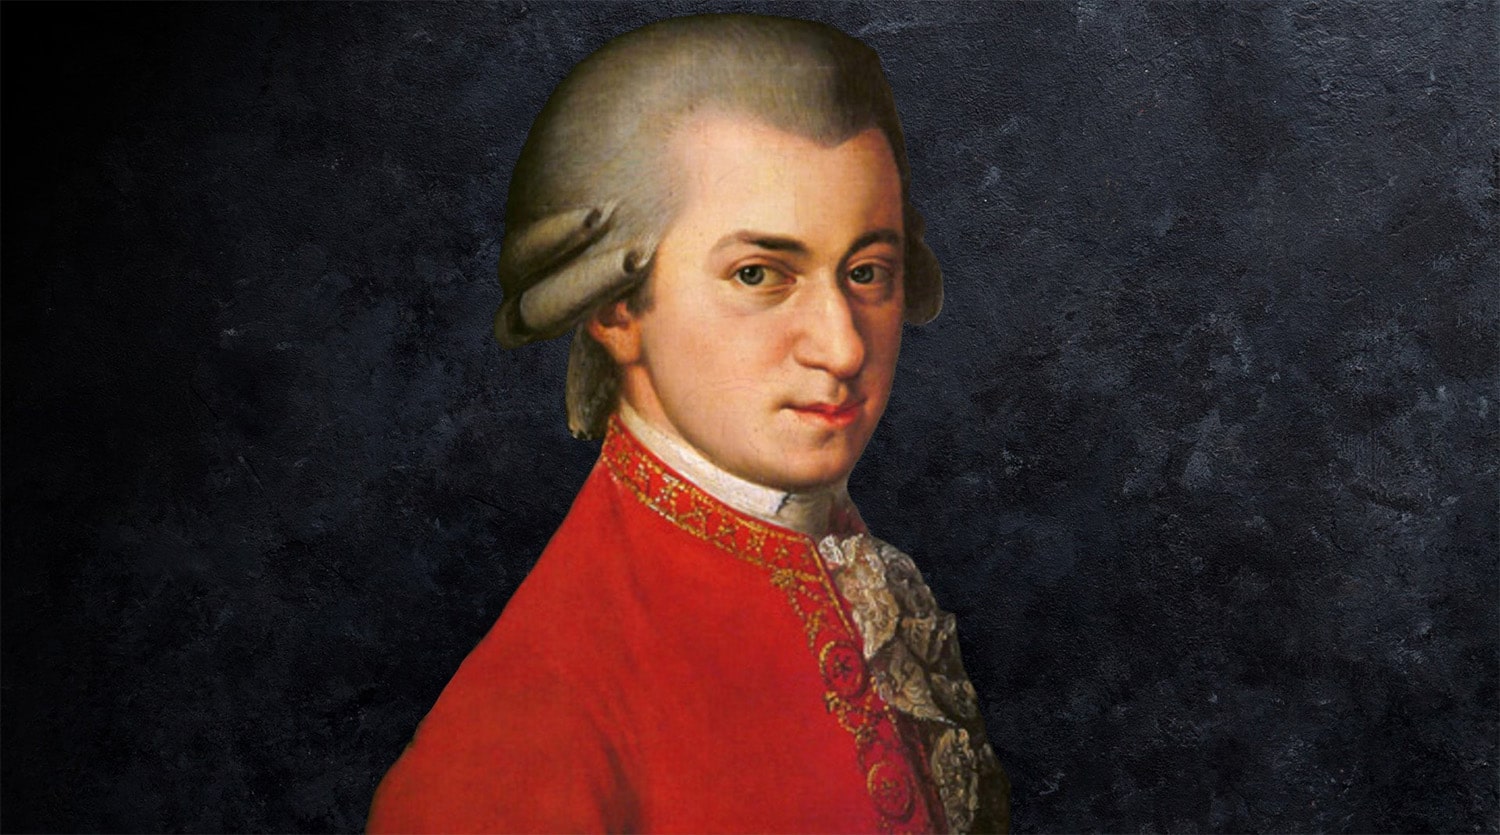 21 interesting facts about Wolfgang Amadeus Mozart